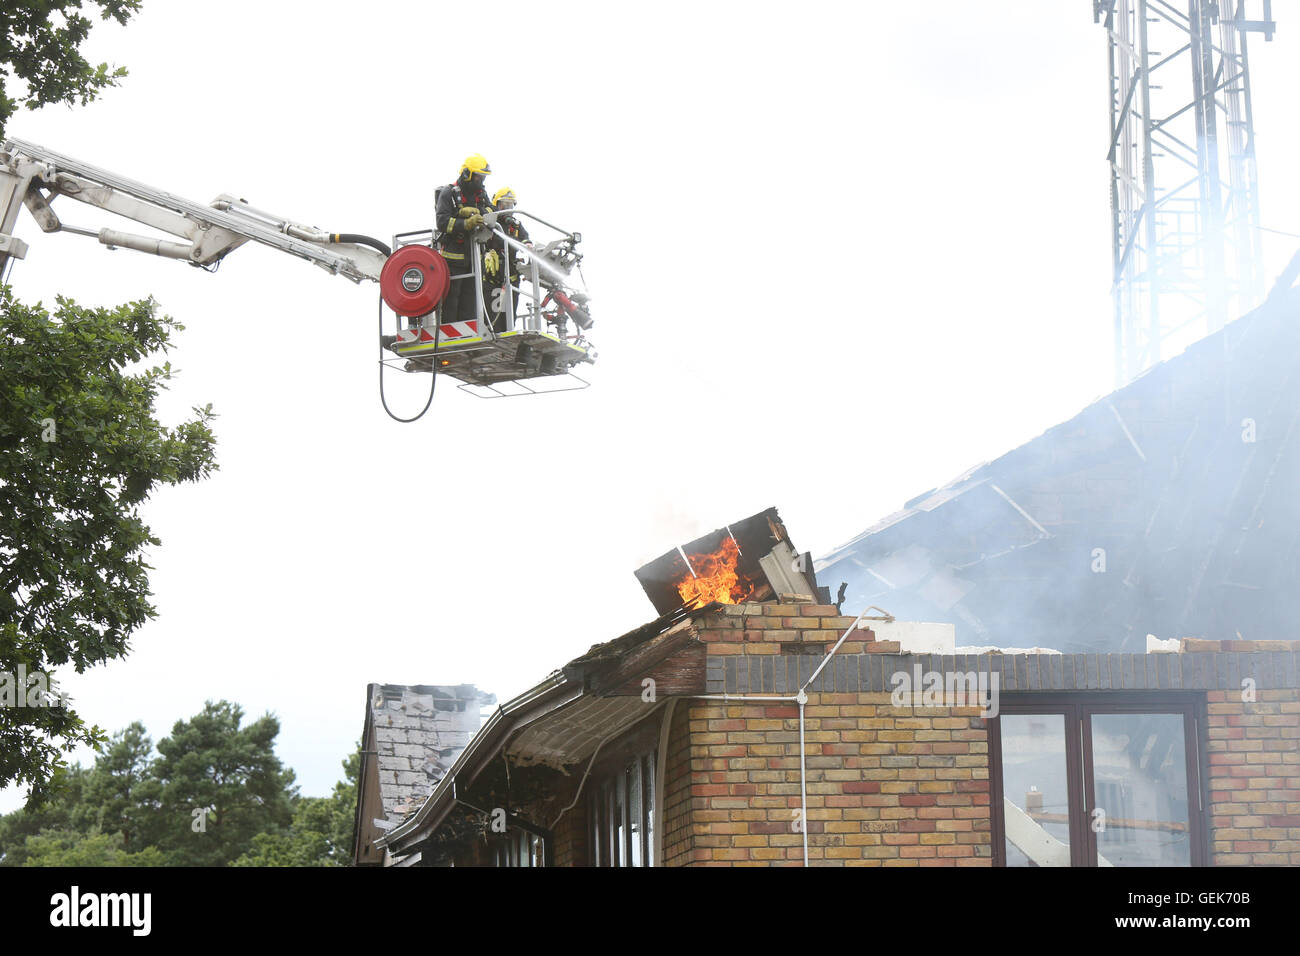 Bordon, Hampshire, UK. 26th July, 2016. More than 50 firefighters are tackling a major blaze at a trading estate in Bordon. It is at Highview, with Hampshire Fire and Rescue sent eight appiances to the. scene. An aerial ladder platform has also been called. In to support the crews. They got the call just before 2pm this afternoon and continue to fight the fire. We are told fire crews have entered the building with breathing apparatus. We understand four units are affected on the roof space and part of the. Roof. And supporting walls have collapsed Credit:  uknip/Alamy Live News Stock Photo